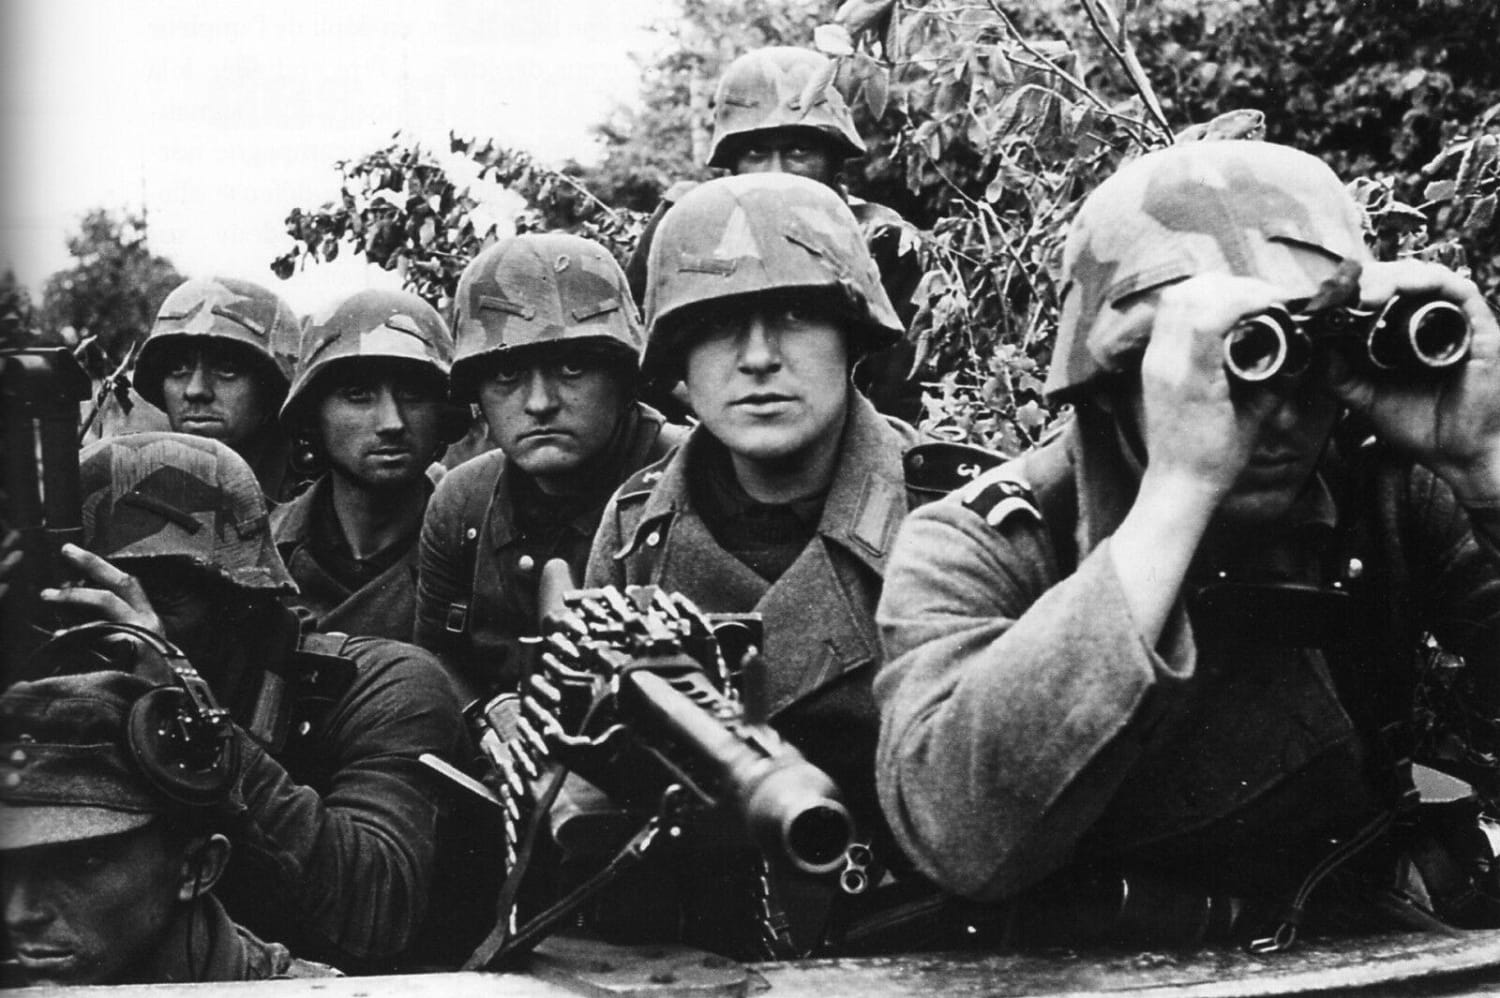 Wehrmacht soldiers awaiting the onslaught, Normandy 1944.